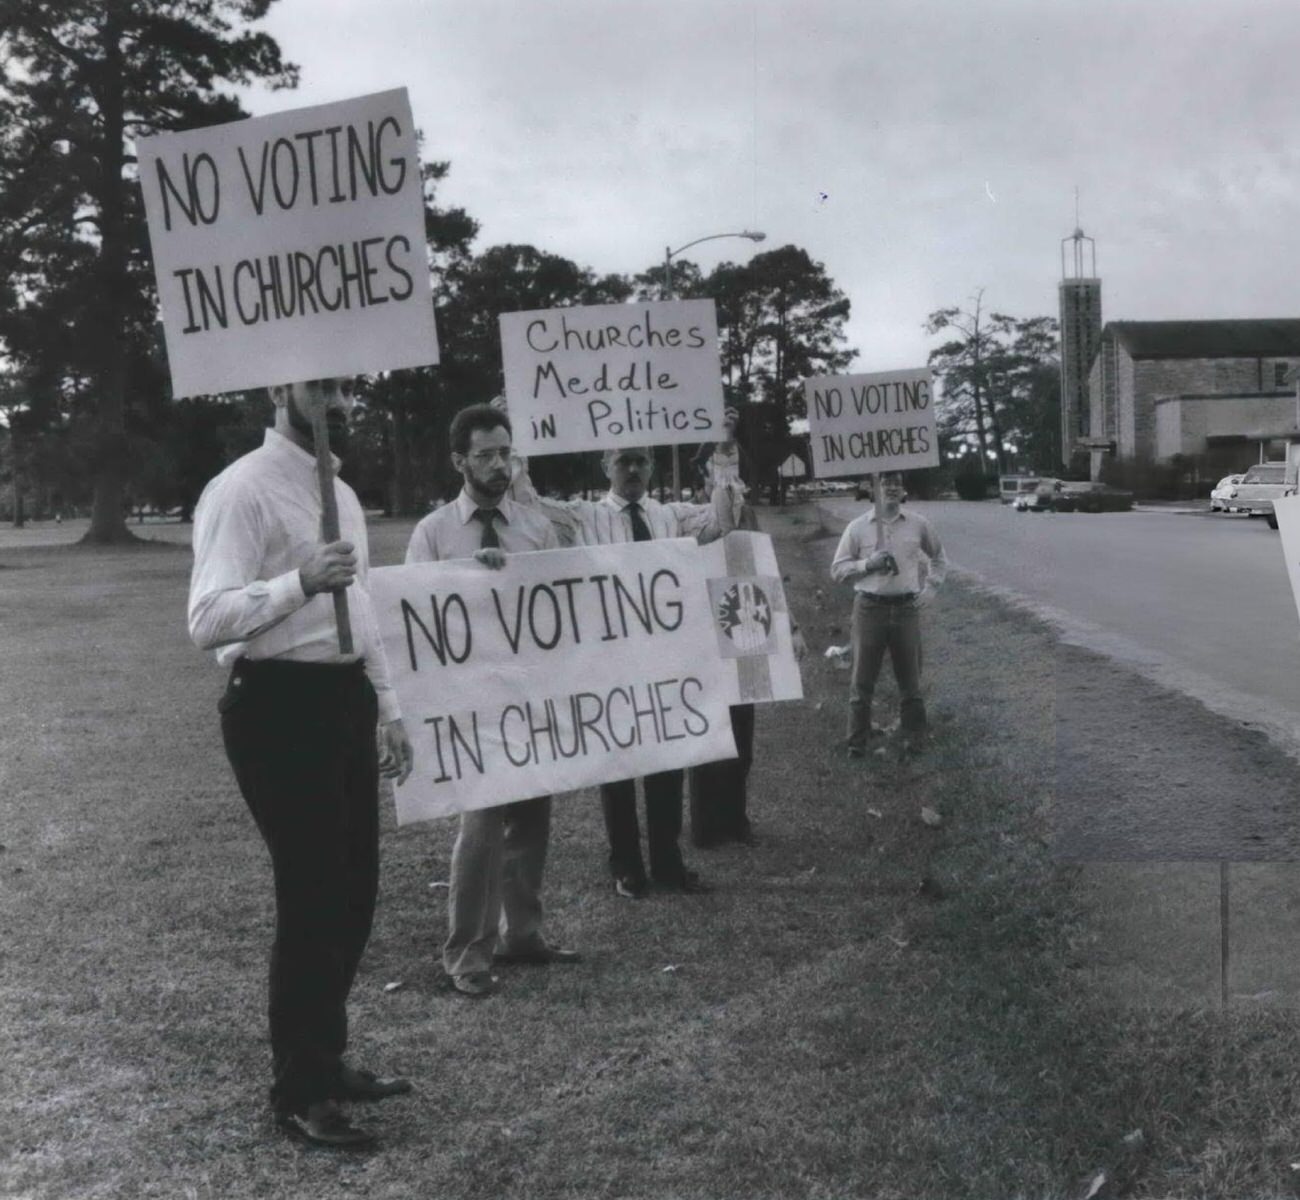 American Atheists protest outside St. Theresa Catholic Church against churches being used as polling places, Houston, Texas.